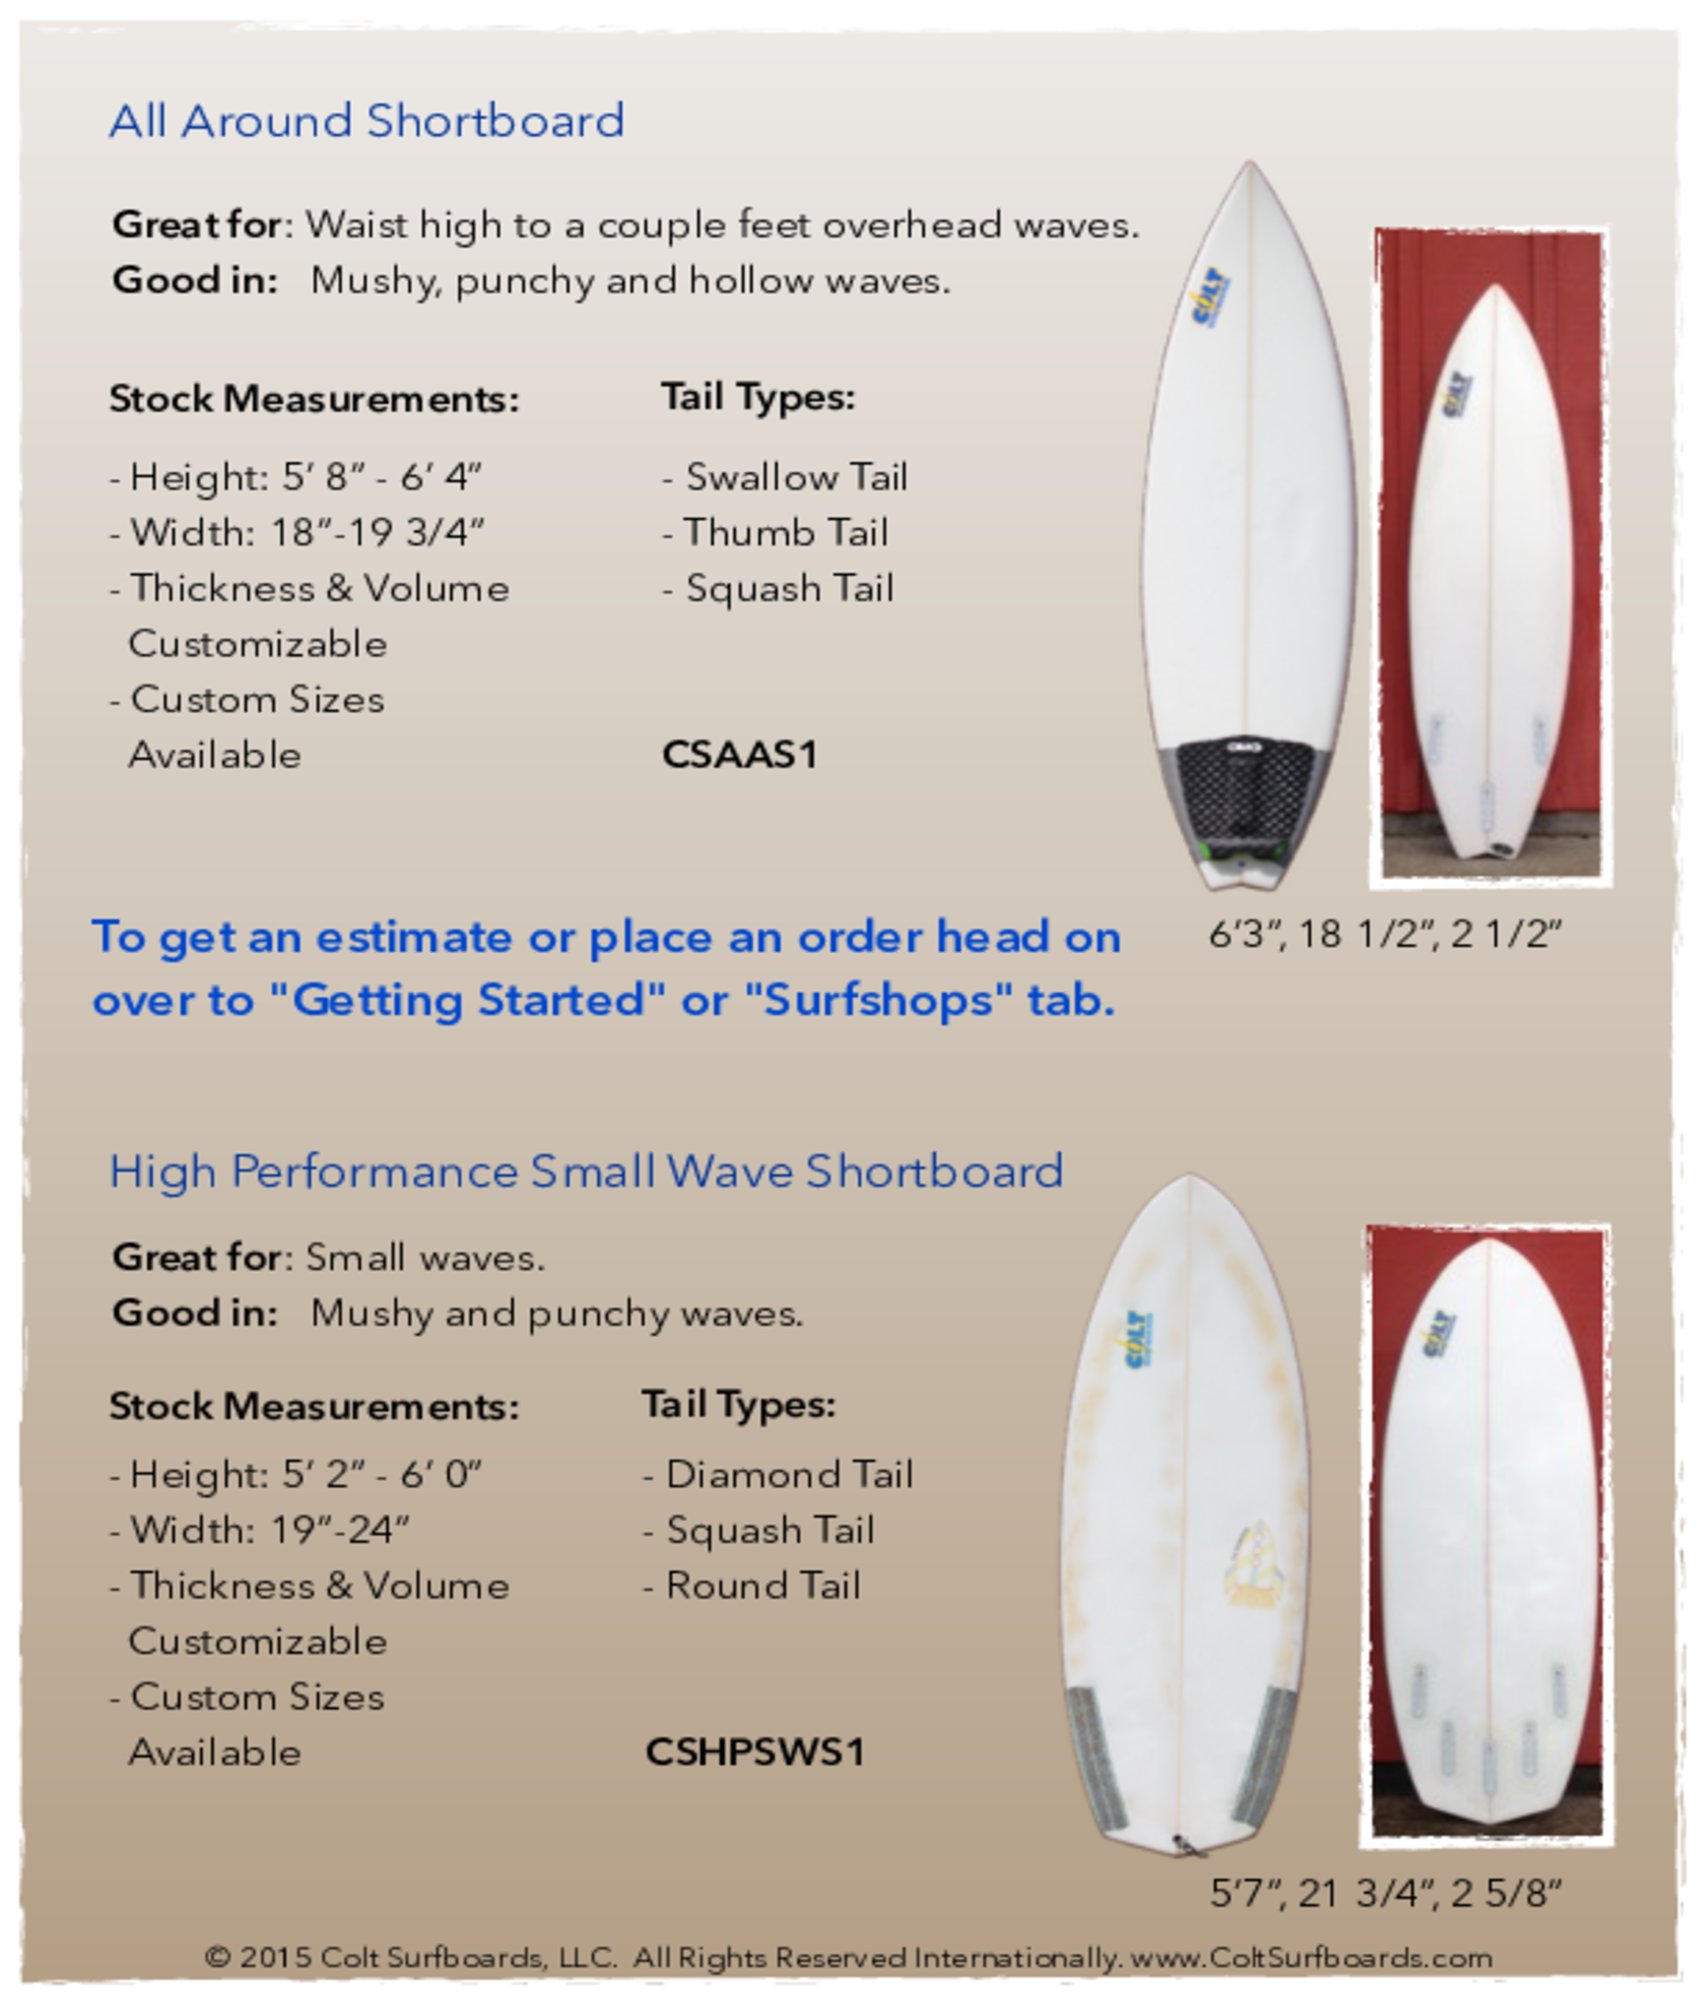 All_Around_Shortboard_and_High_Performance_Small_Wave_Shortboard_Surfboard_tab © 2015 Colt Surfboards LLC All rights reserved internationally 4